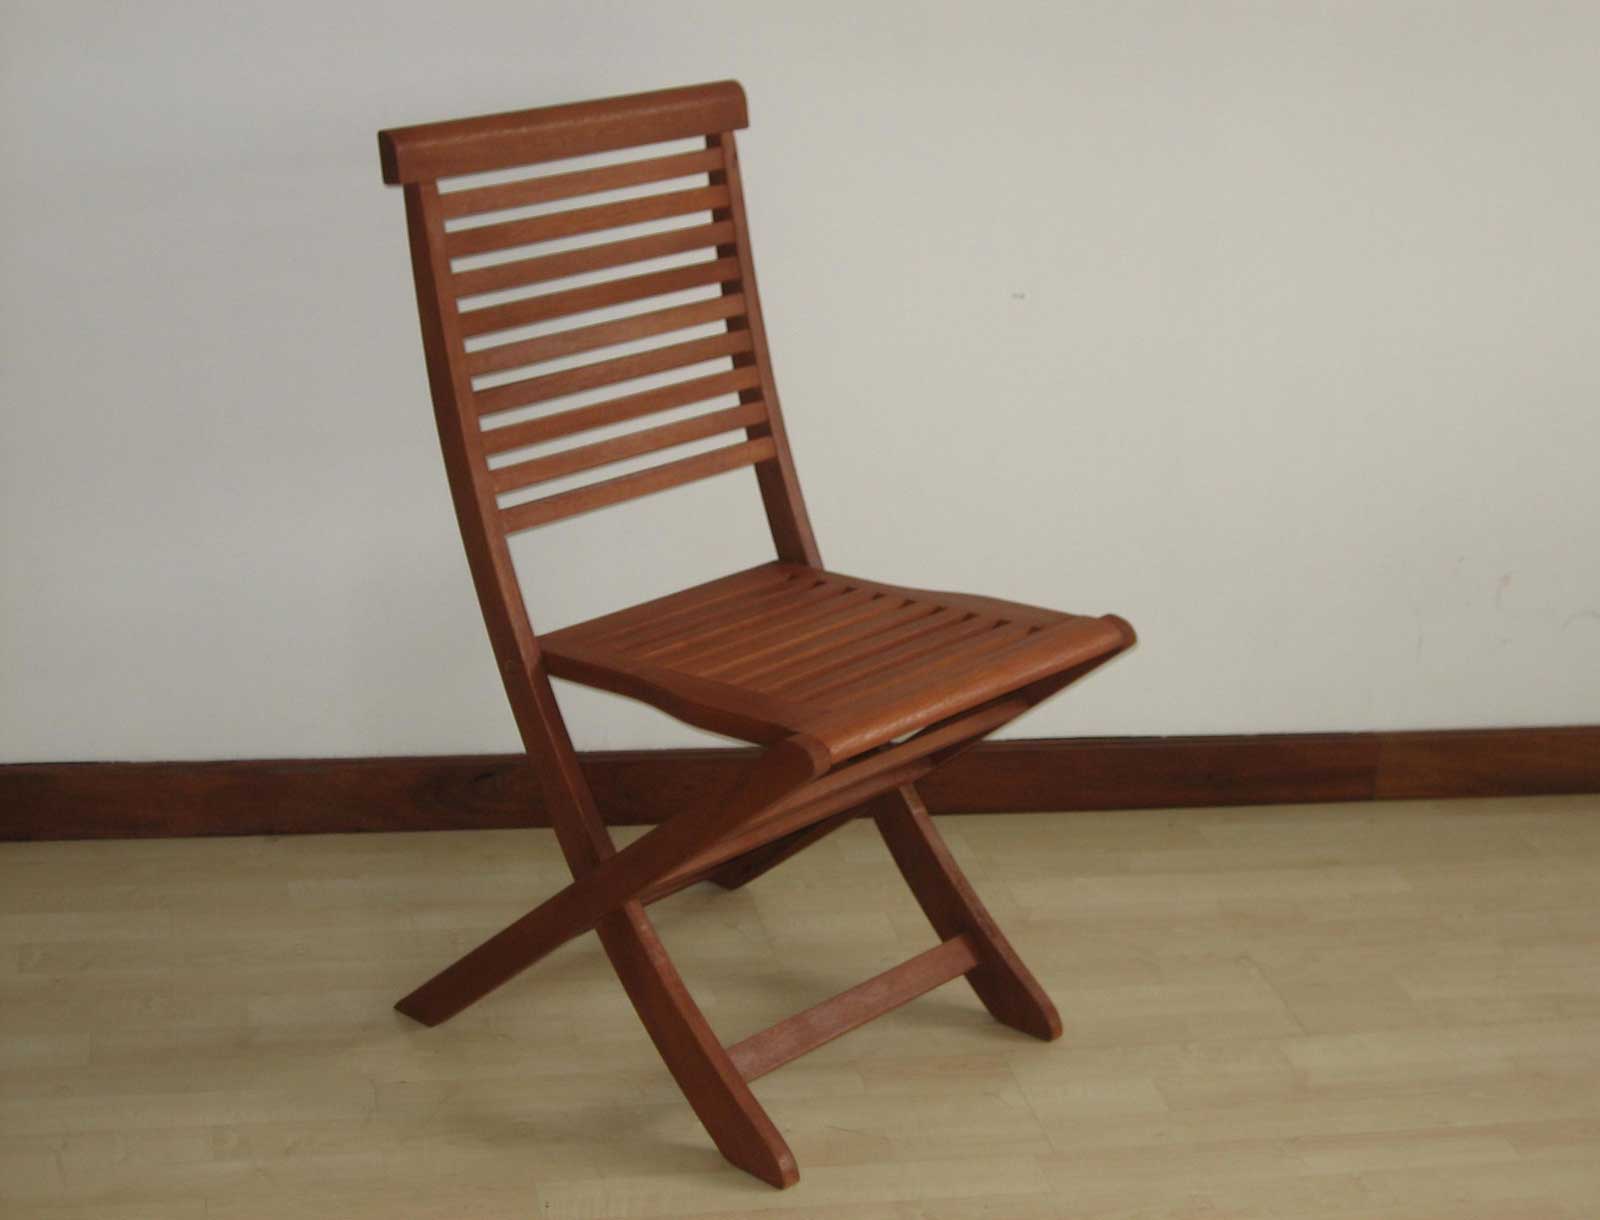 Wood and Metal Folding Chair - Bed Bath  Beyond